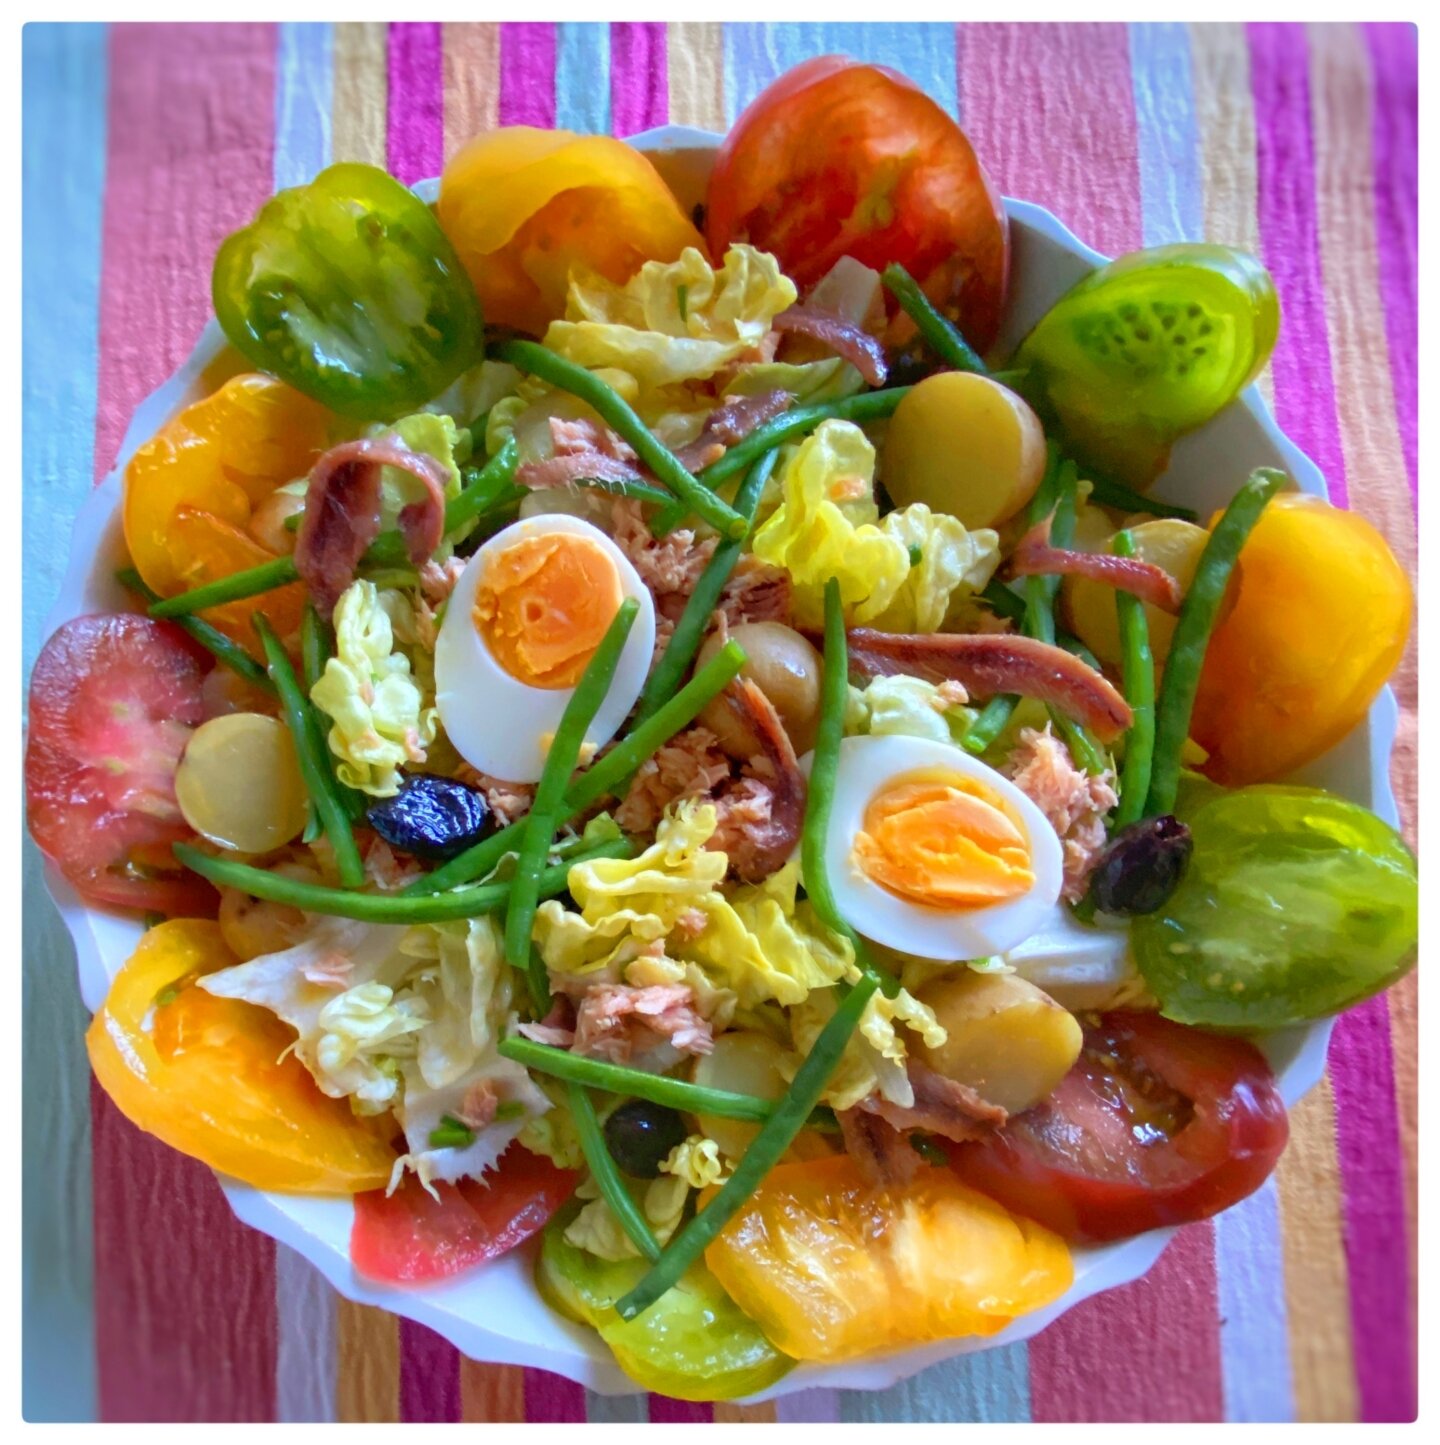 An American girl makes a Salade Ni&ccedil;oise for a Ni&ccedil;ois guy - Gilles! At home in Seillans, Provence. #saladenicoise  #provence #summerfood #healthylifestyle